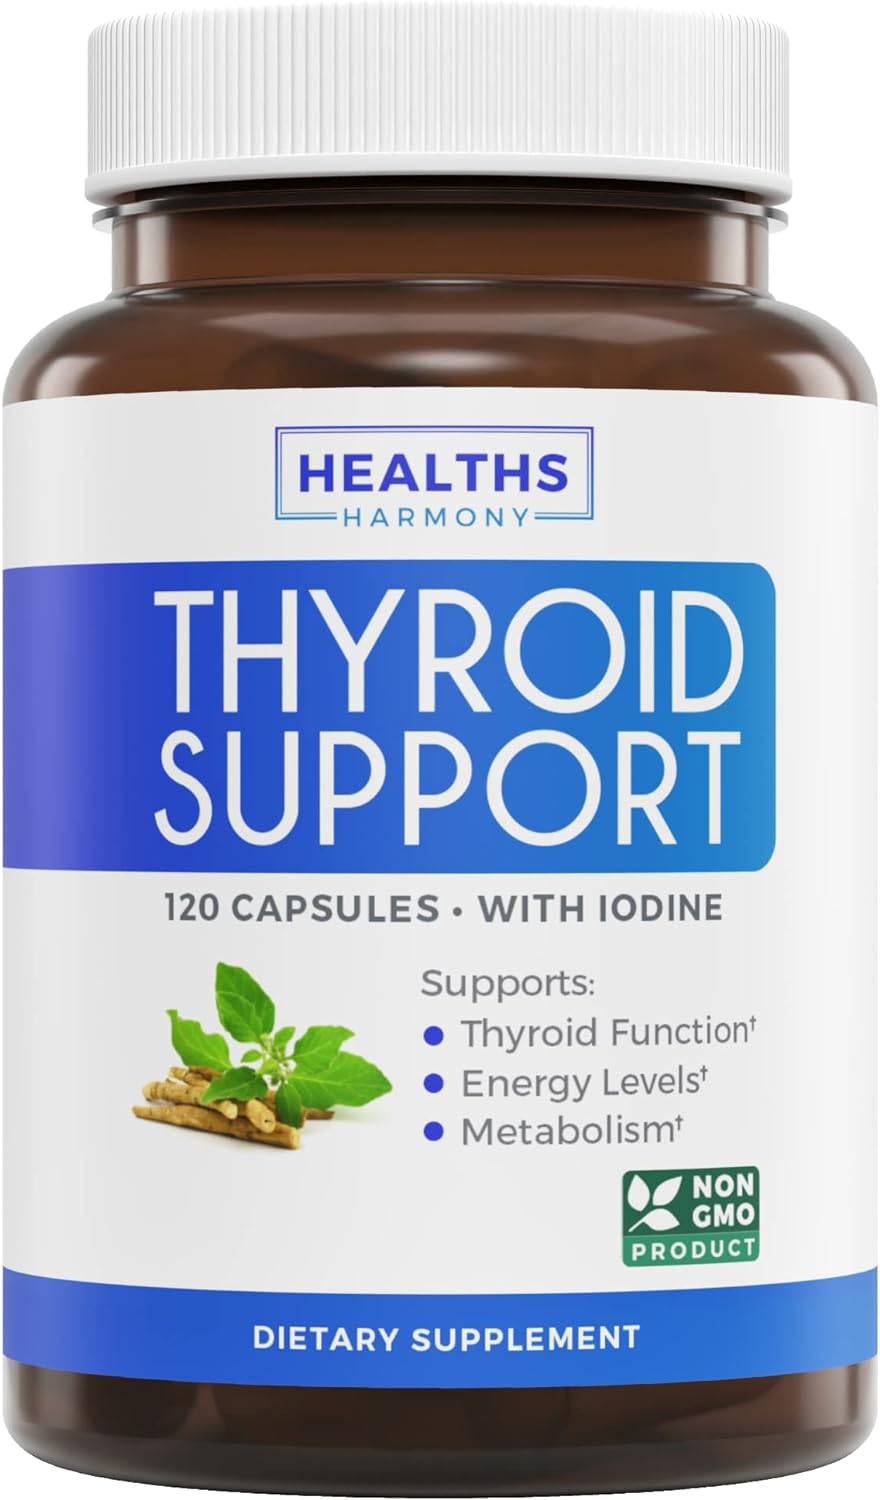 Thyroid Support with Iodine - 120 Capsules (Non-GMO) Improve Your Energy - Ashwagandha Root, Zinc, Selenium, Vitamin B12 Complex - Thyroid Health Supplement for Women and for Men - 60 Day Supply